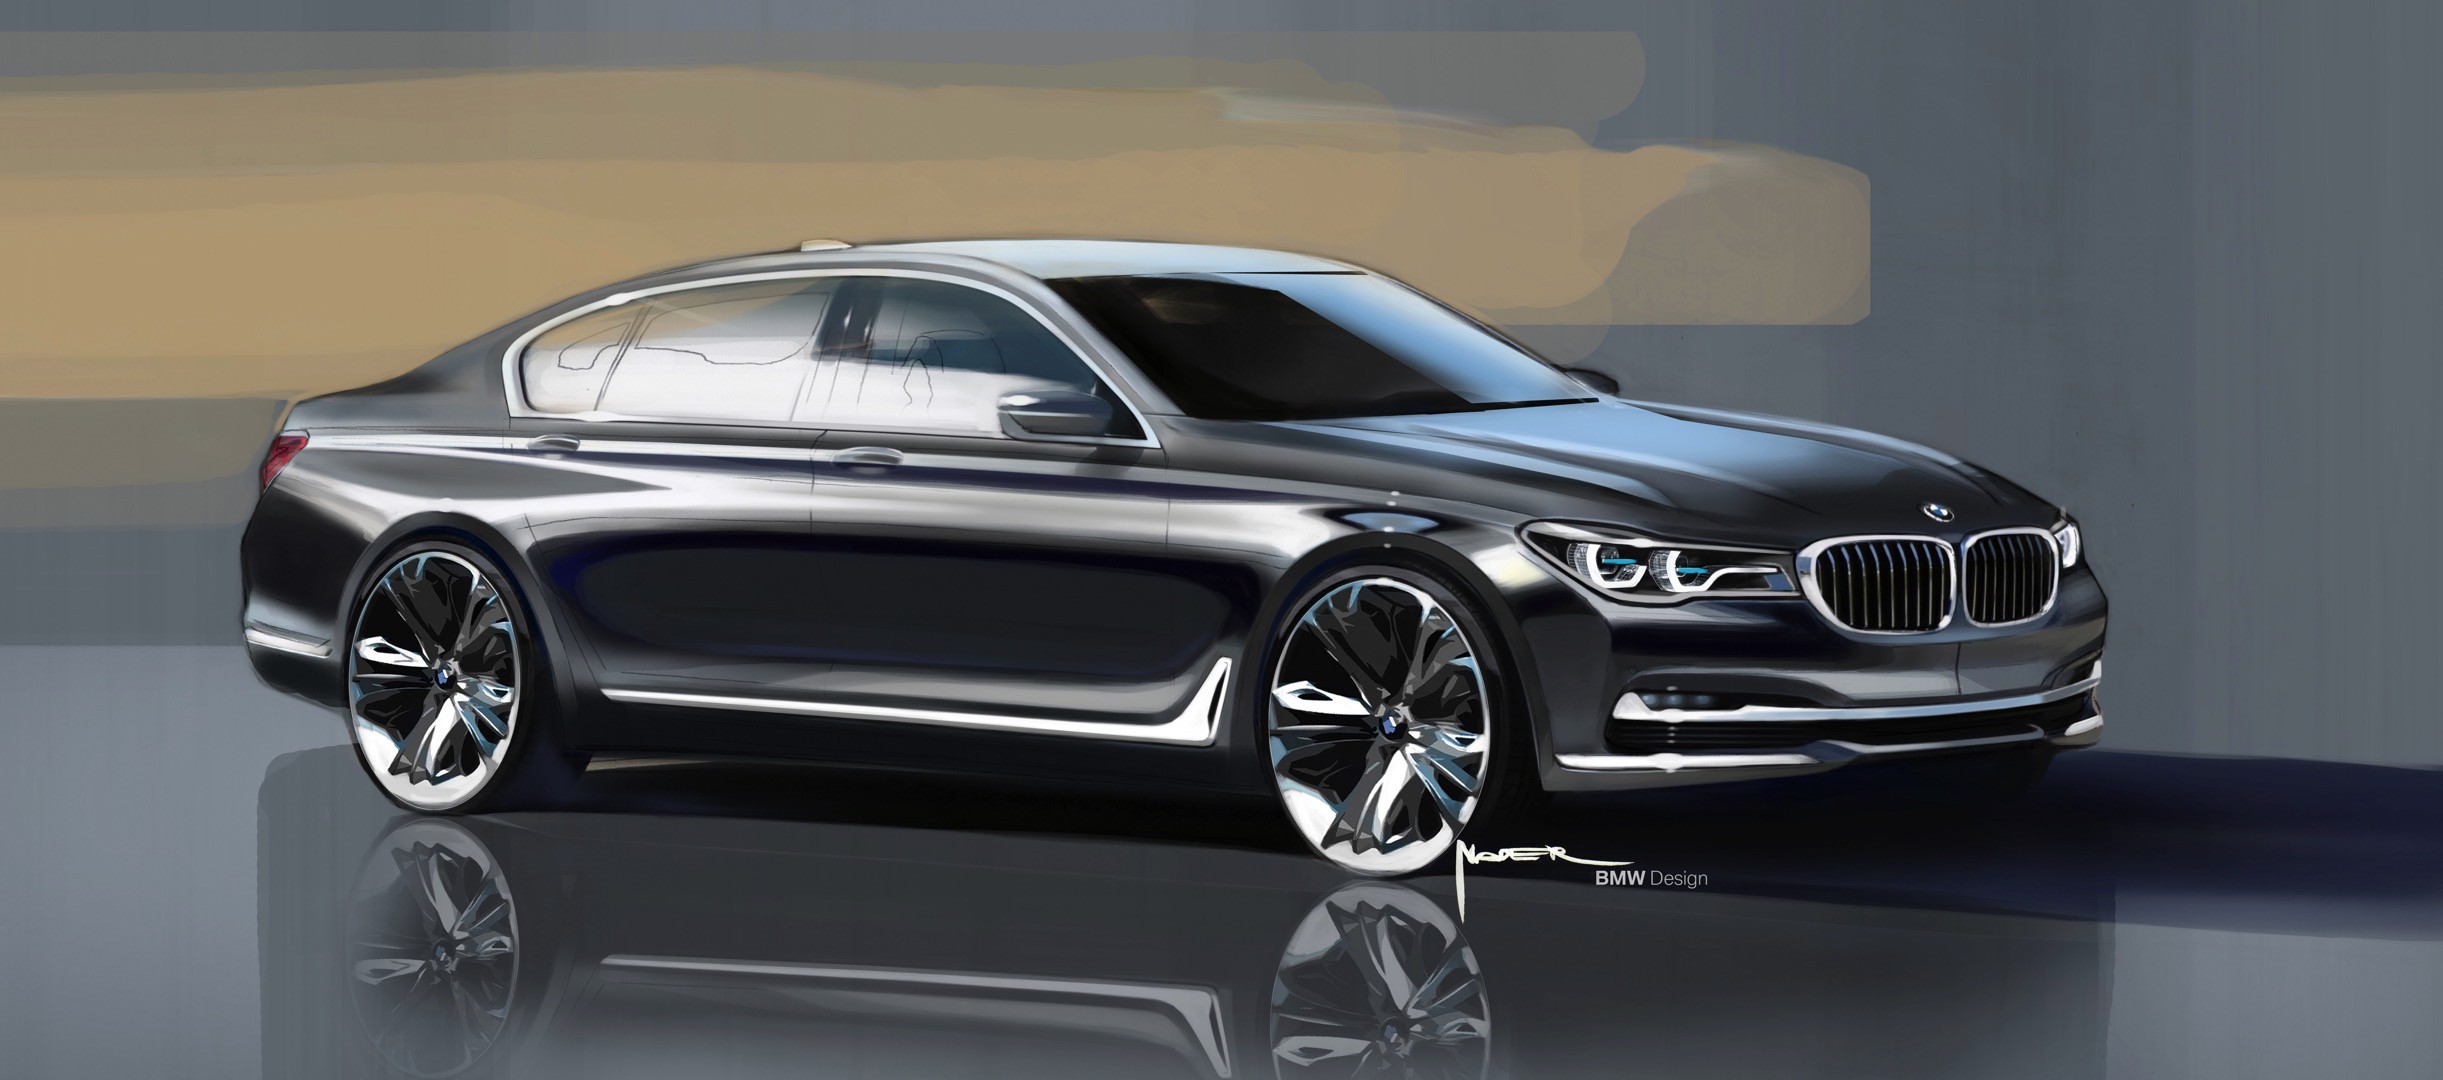 2016-bmw-7-series-finally-officially-unveiled-the-good-stuffs-inside-photo-gallery_75